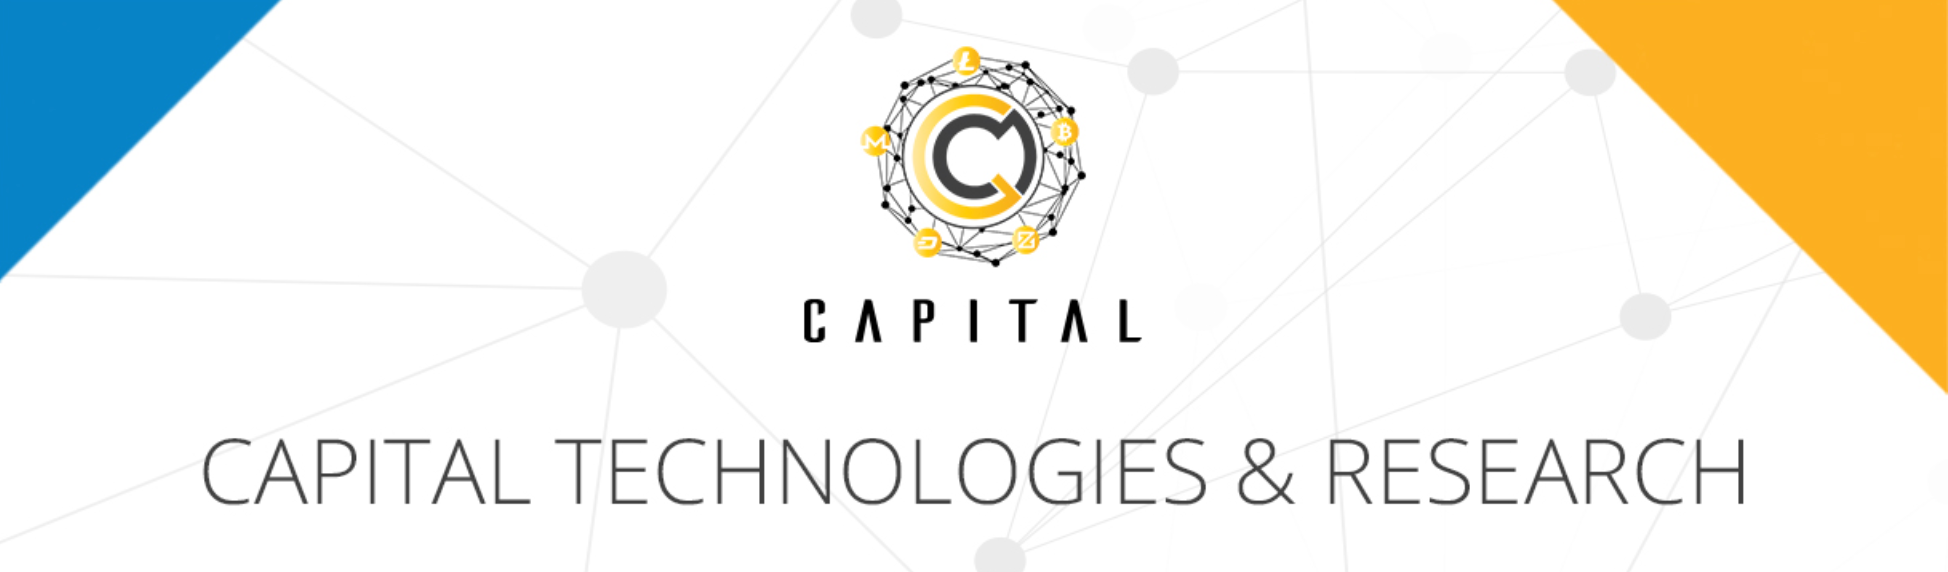 Image result for capital technologies and research ico